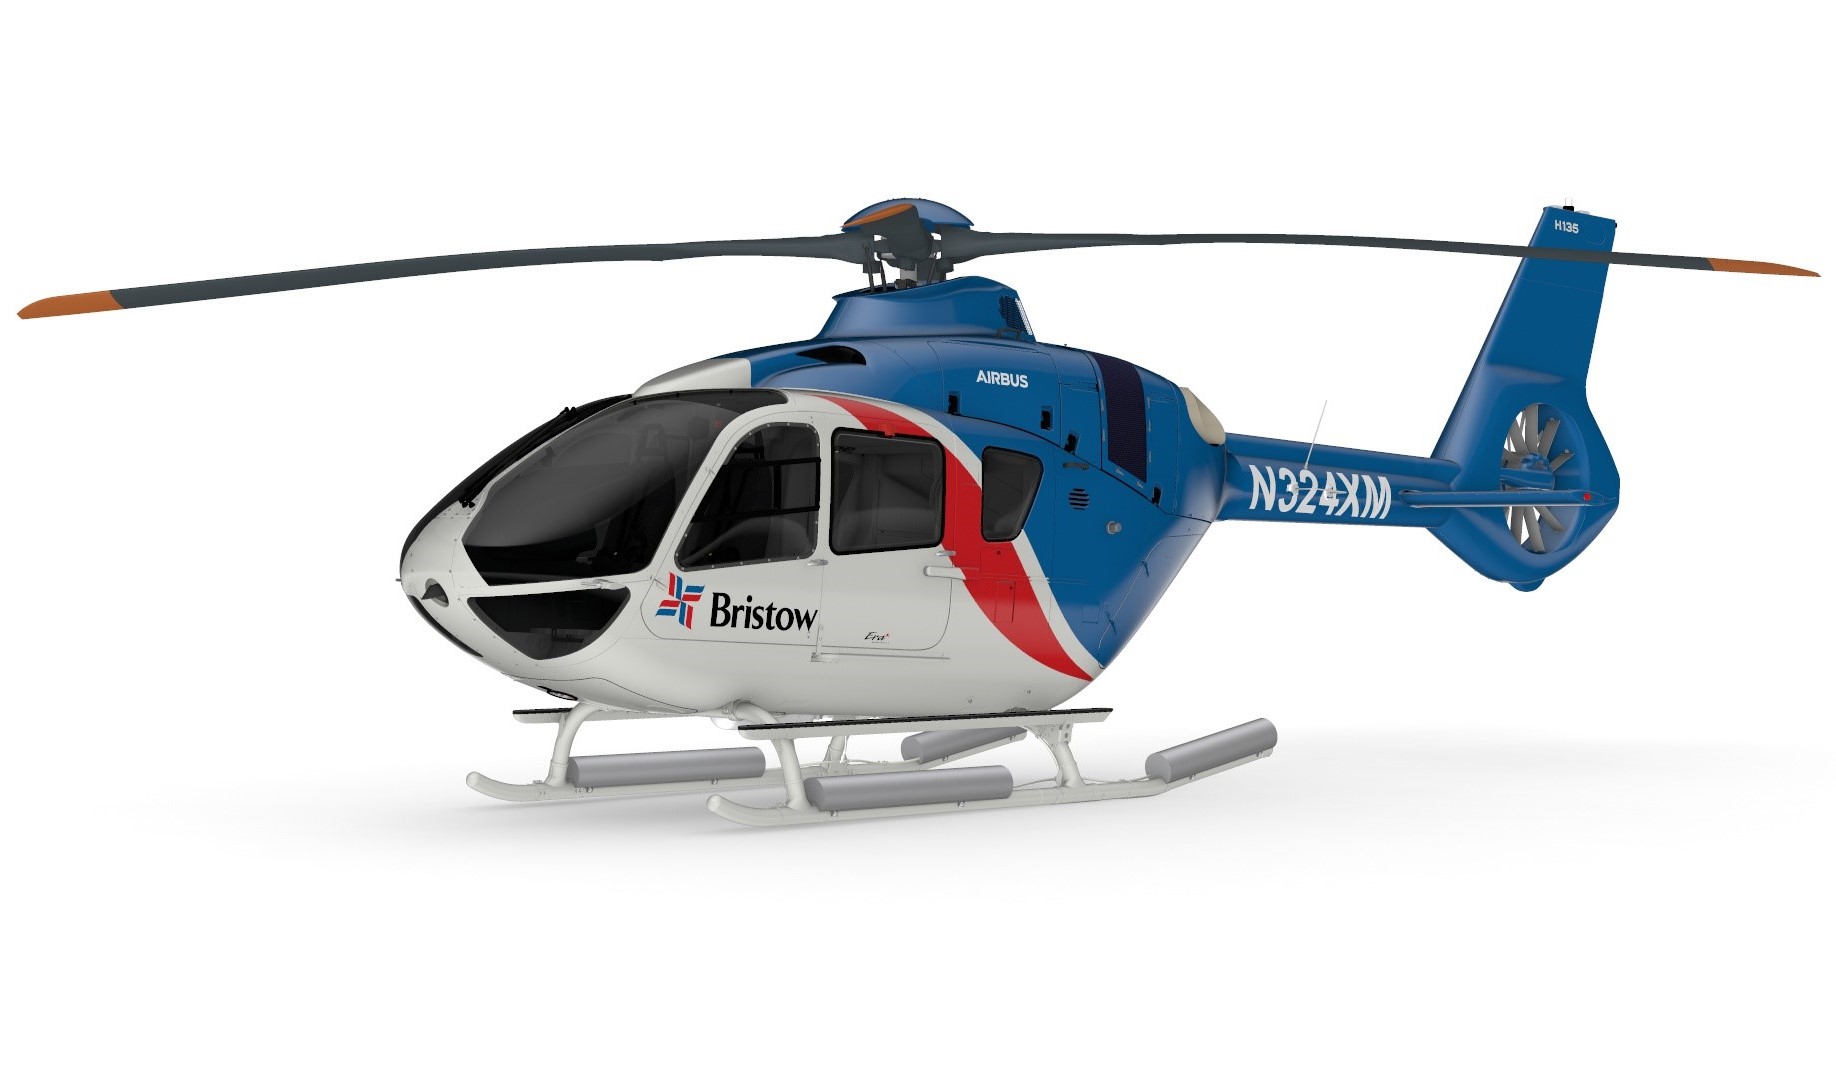 Bristow signs framework contract with Airbus for up to 15 H135s